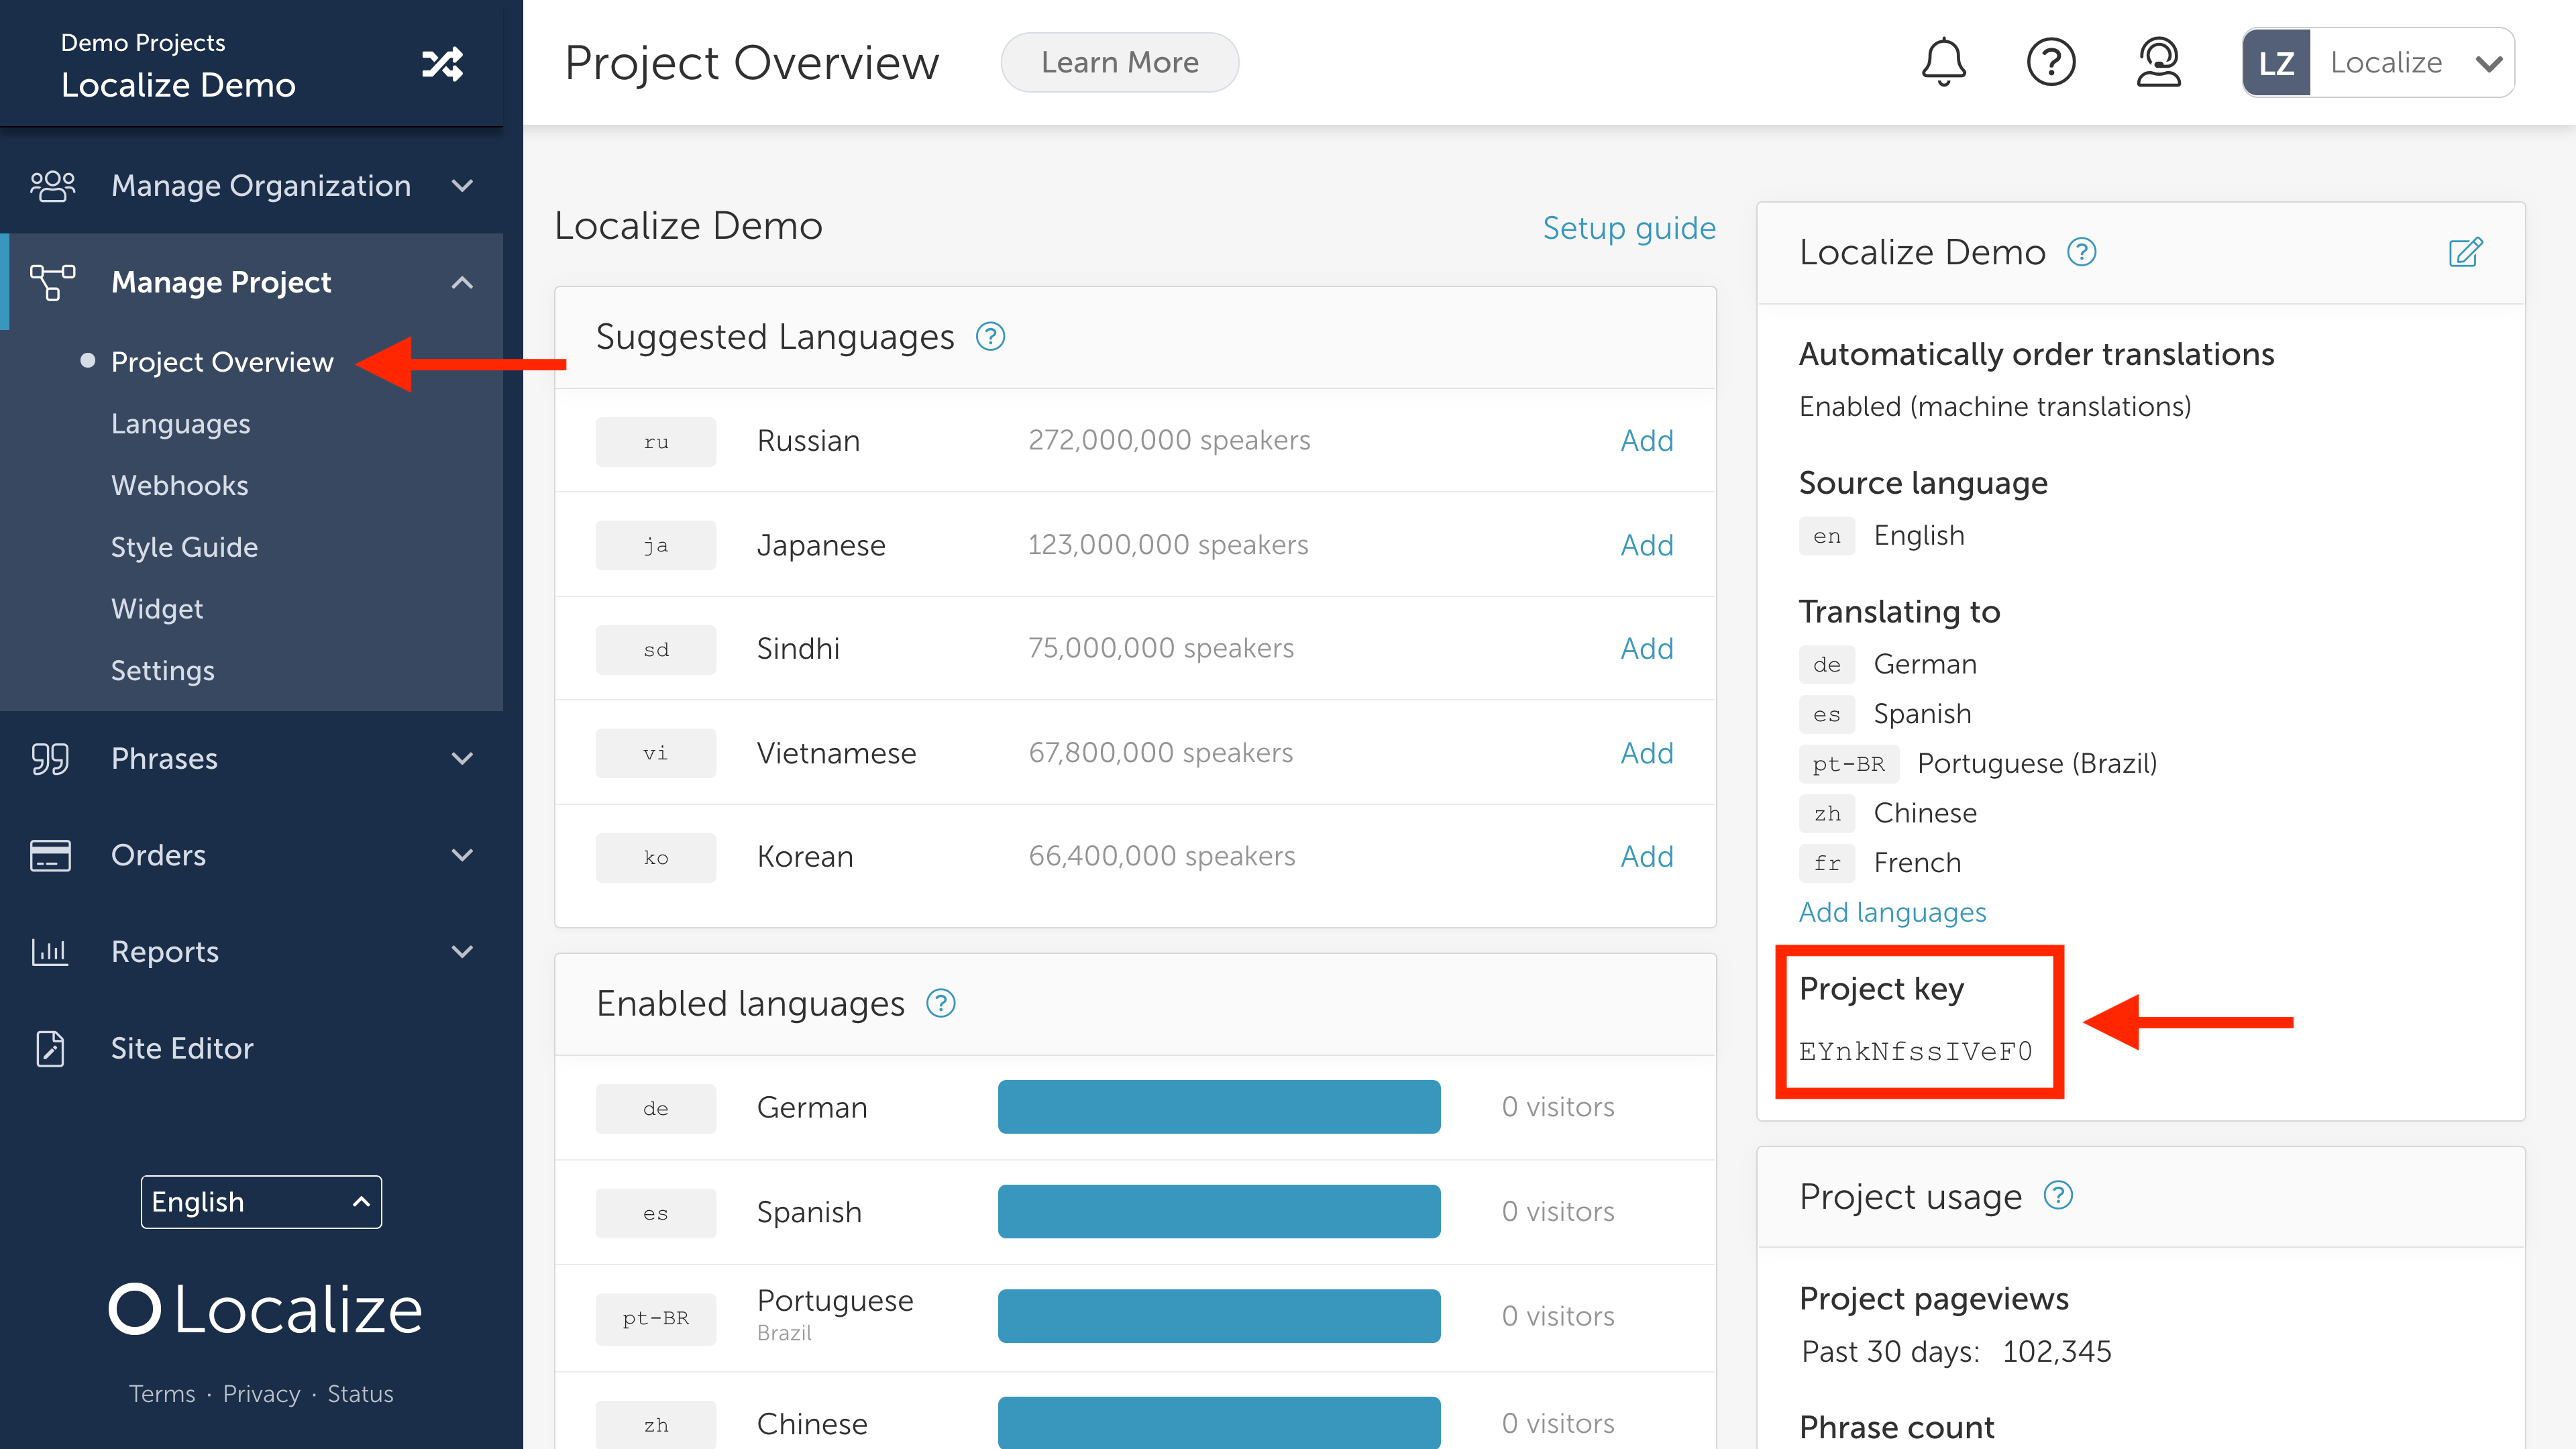 Shows the Localize dashboard with project key highlighted